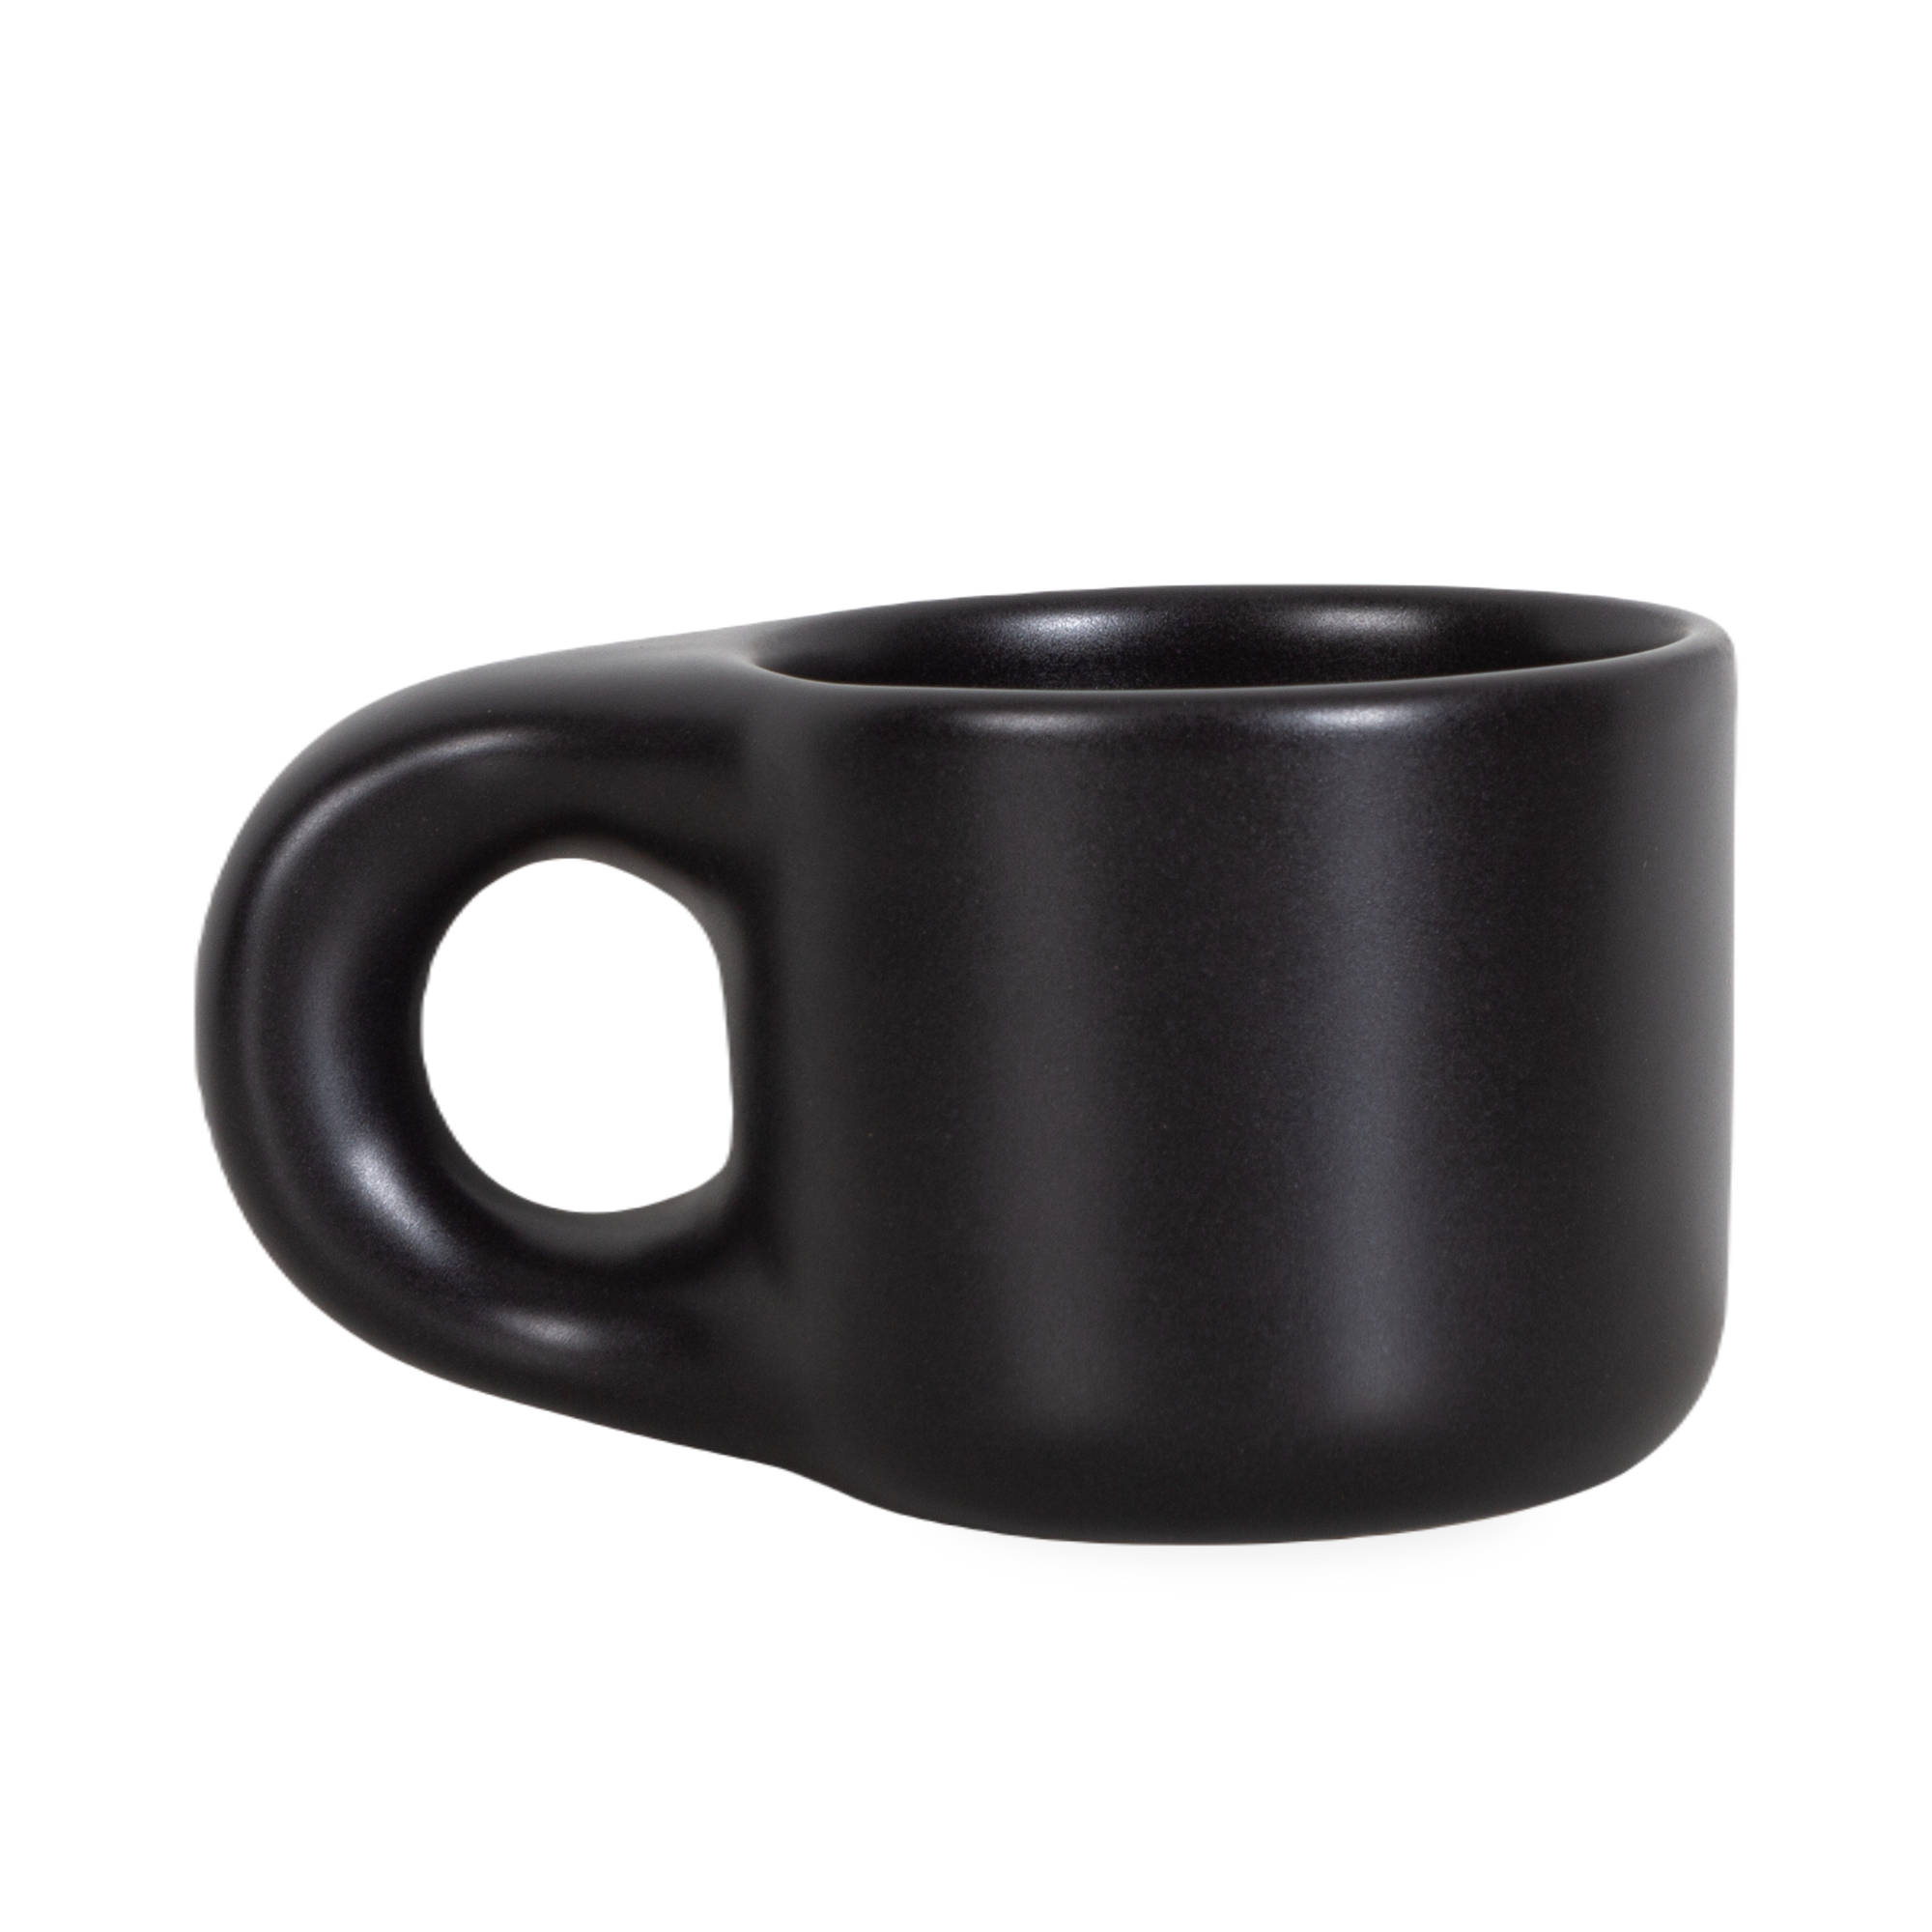 Cast in stoneware from a hand-formed original, the Dough Stoneware Mug has a minimalist, sculptural quality complemented by an outsized handle, creating a uniquely portioned silhou